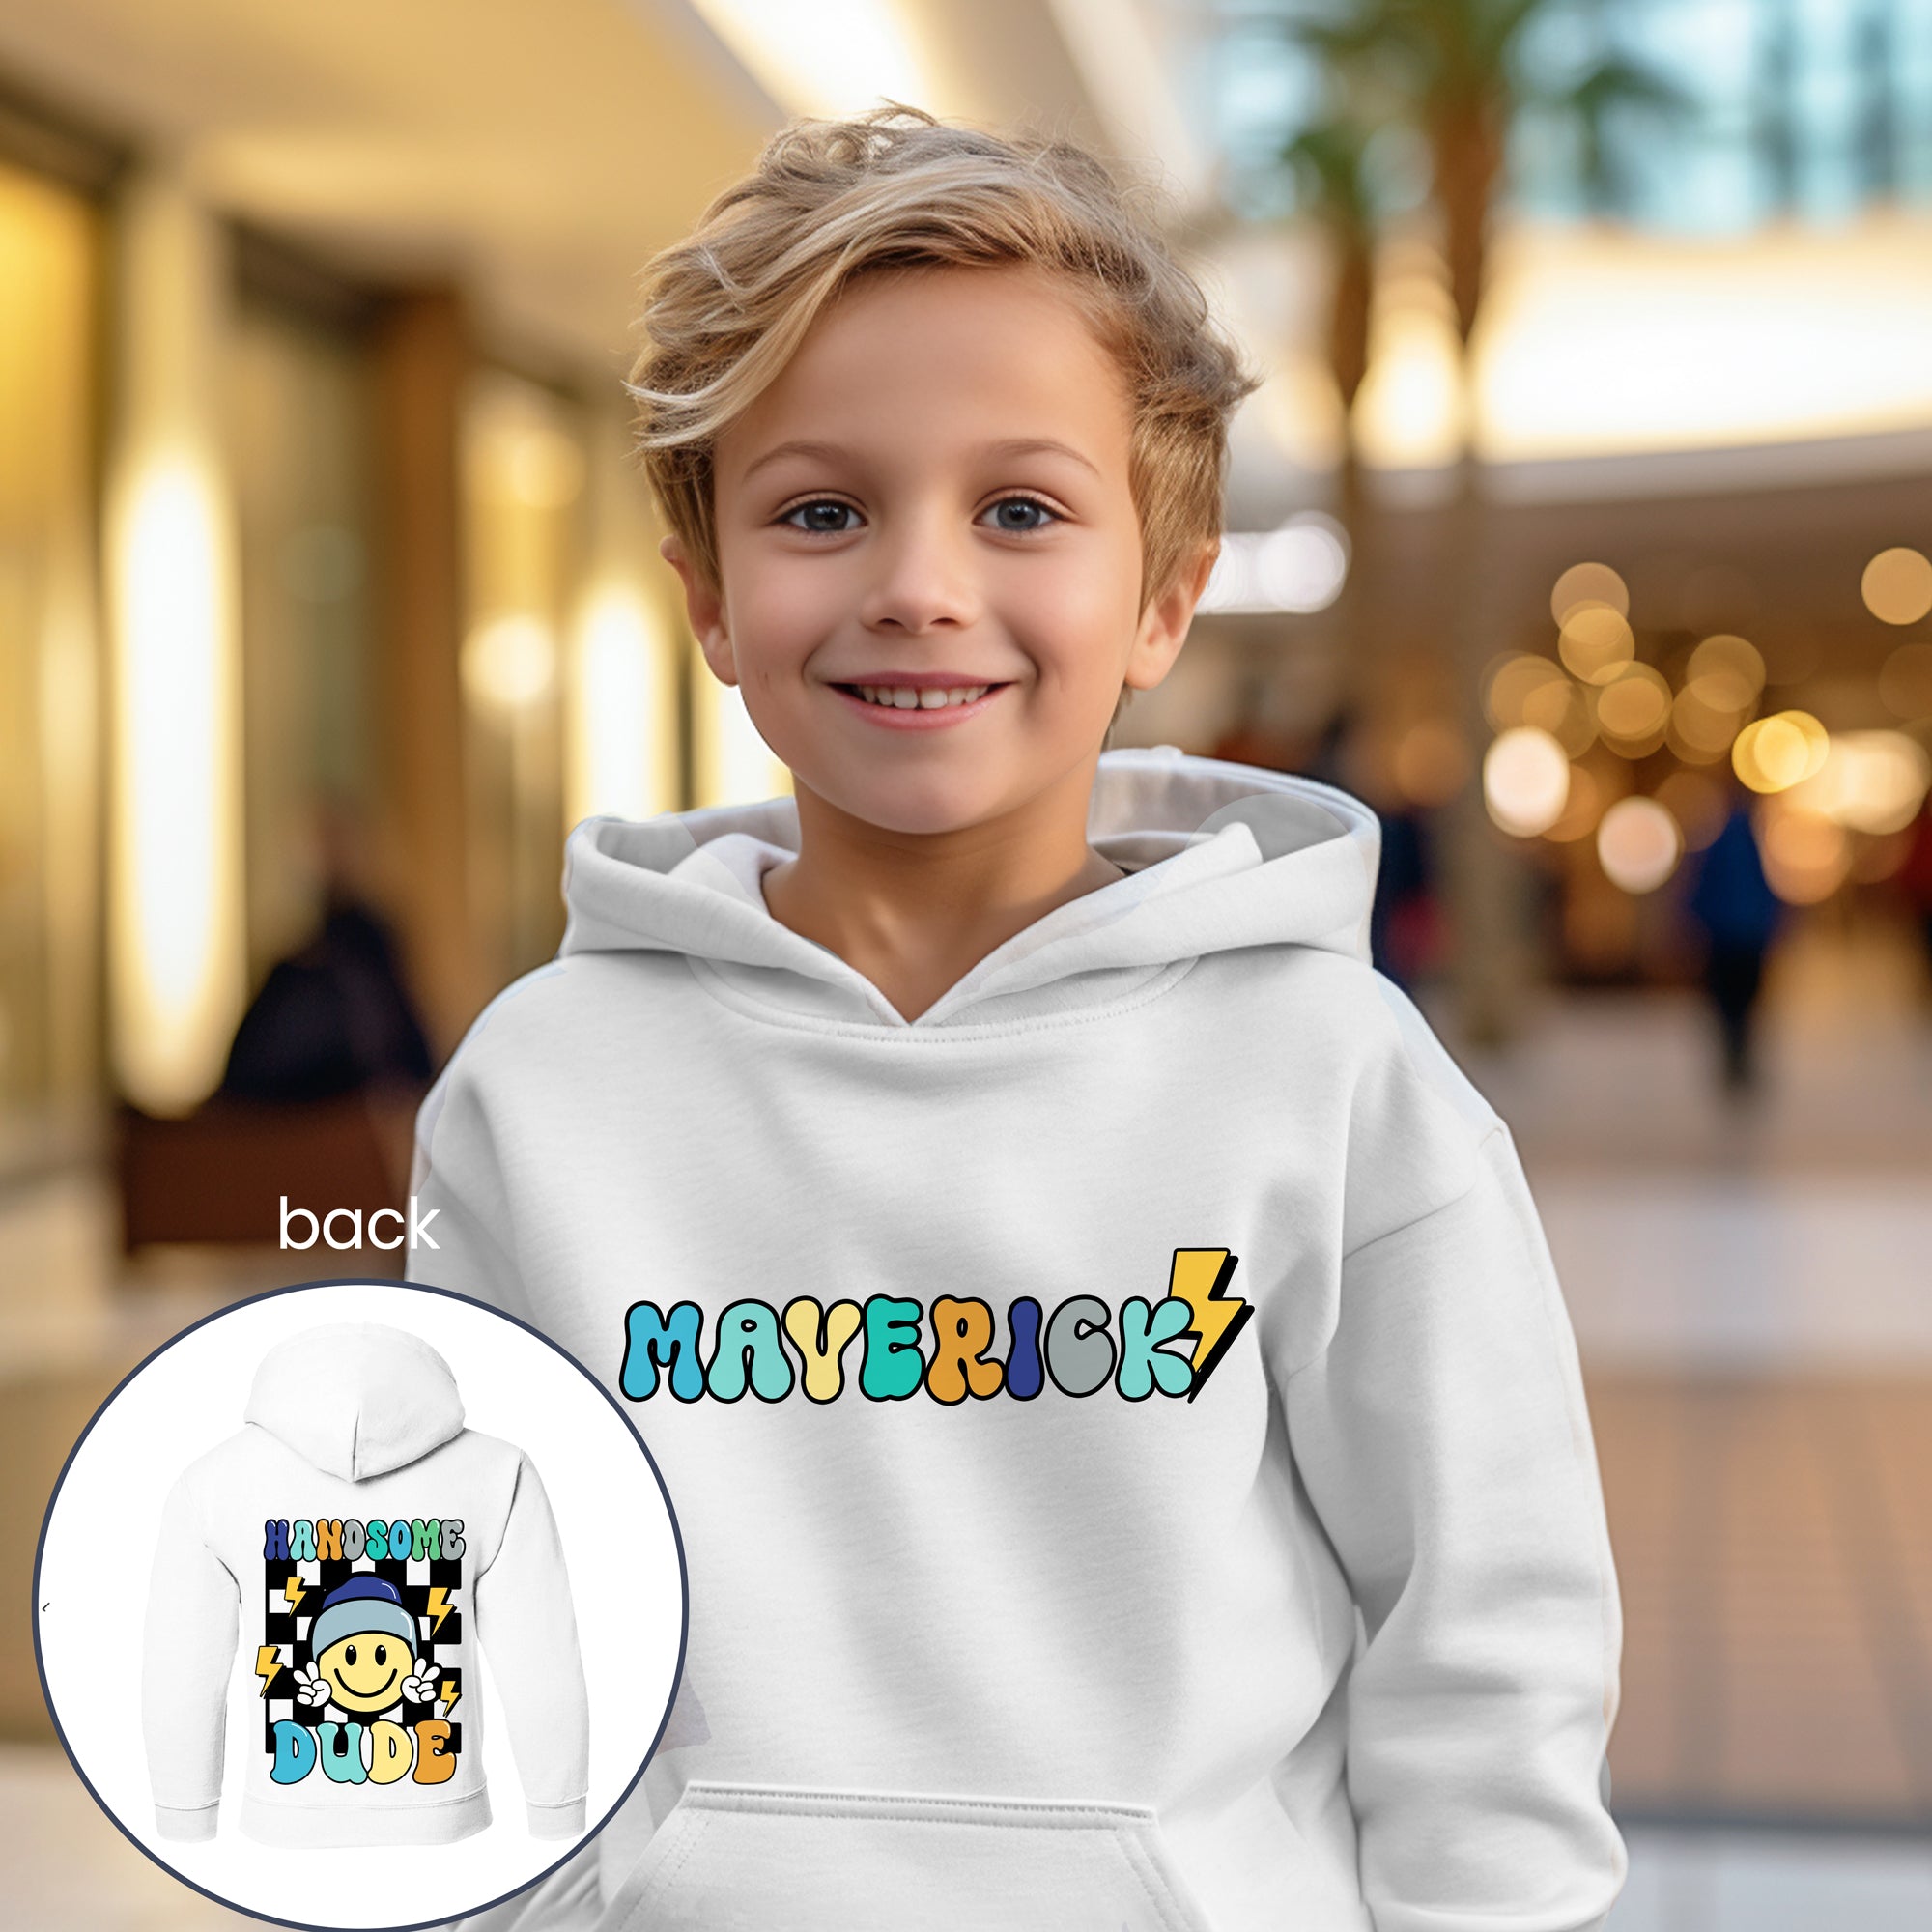 Handsome Dude - Personalized Kids Hoodie